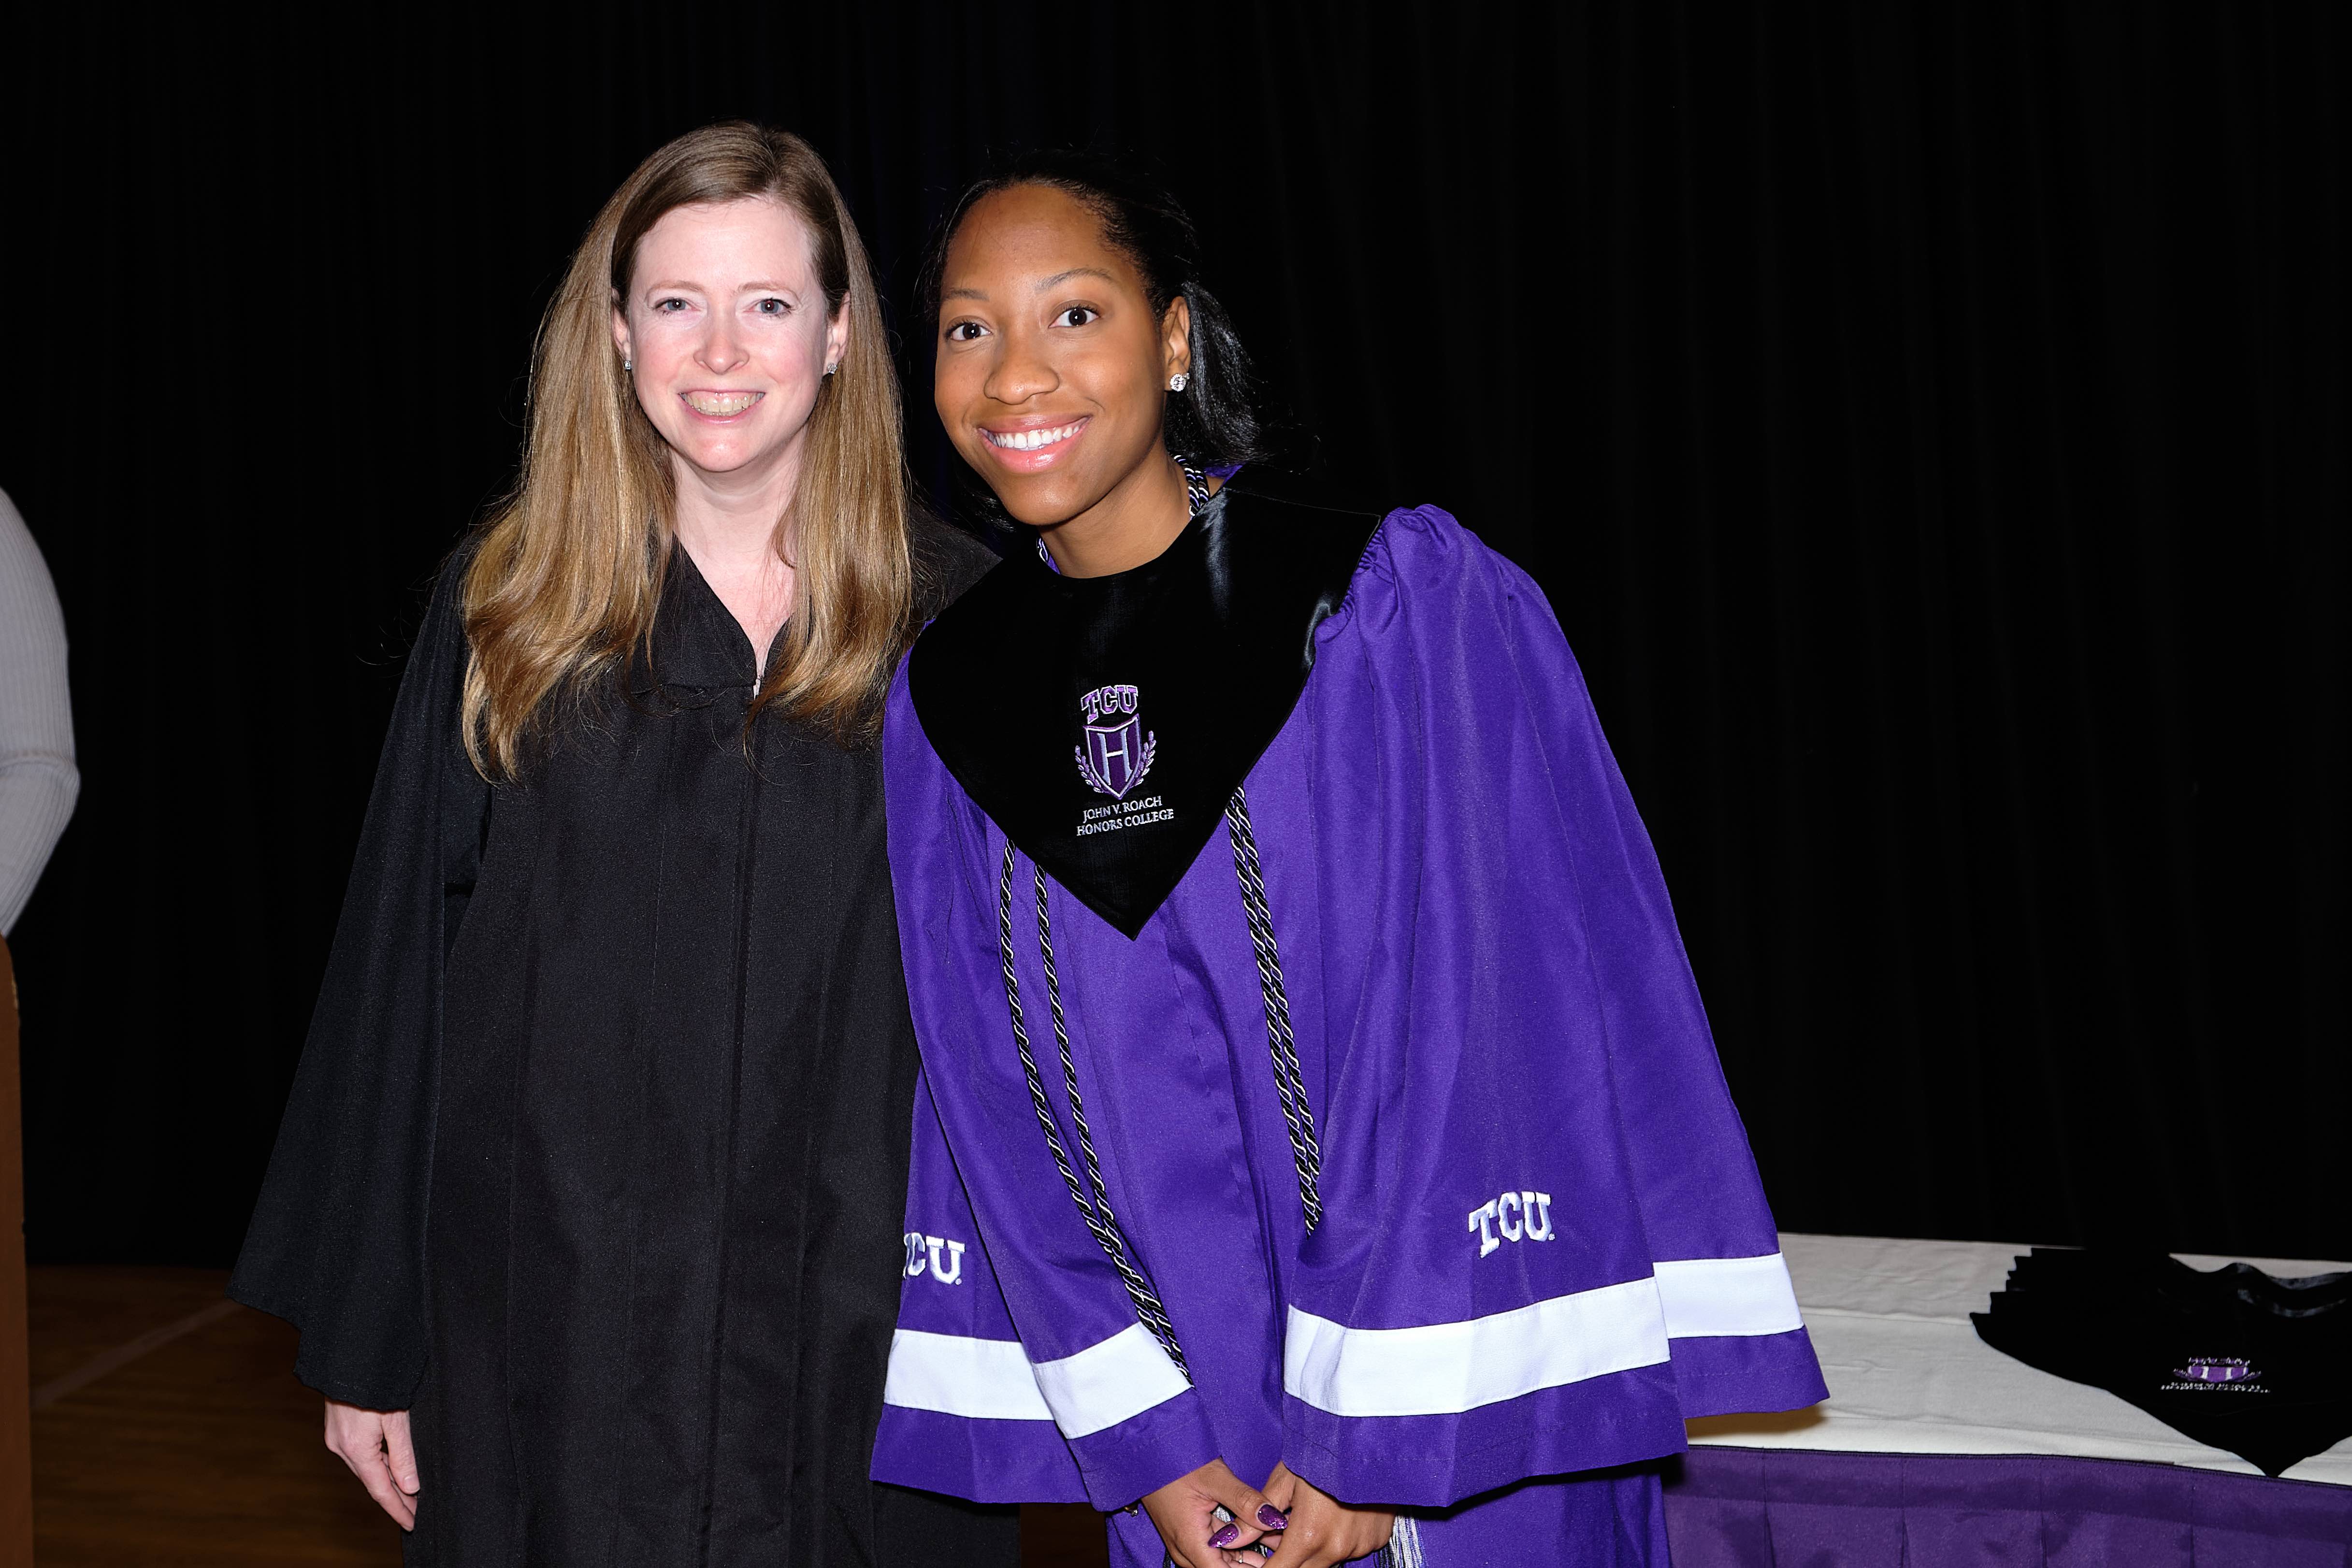 Brooke (right) at the Honors Laureate ceremony